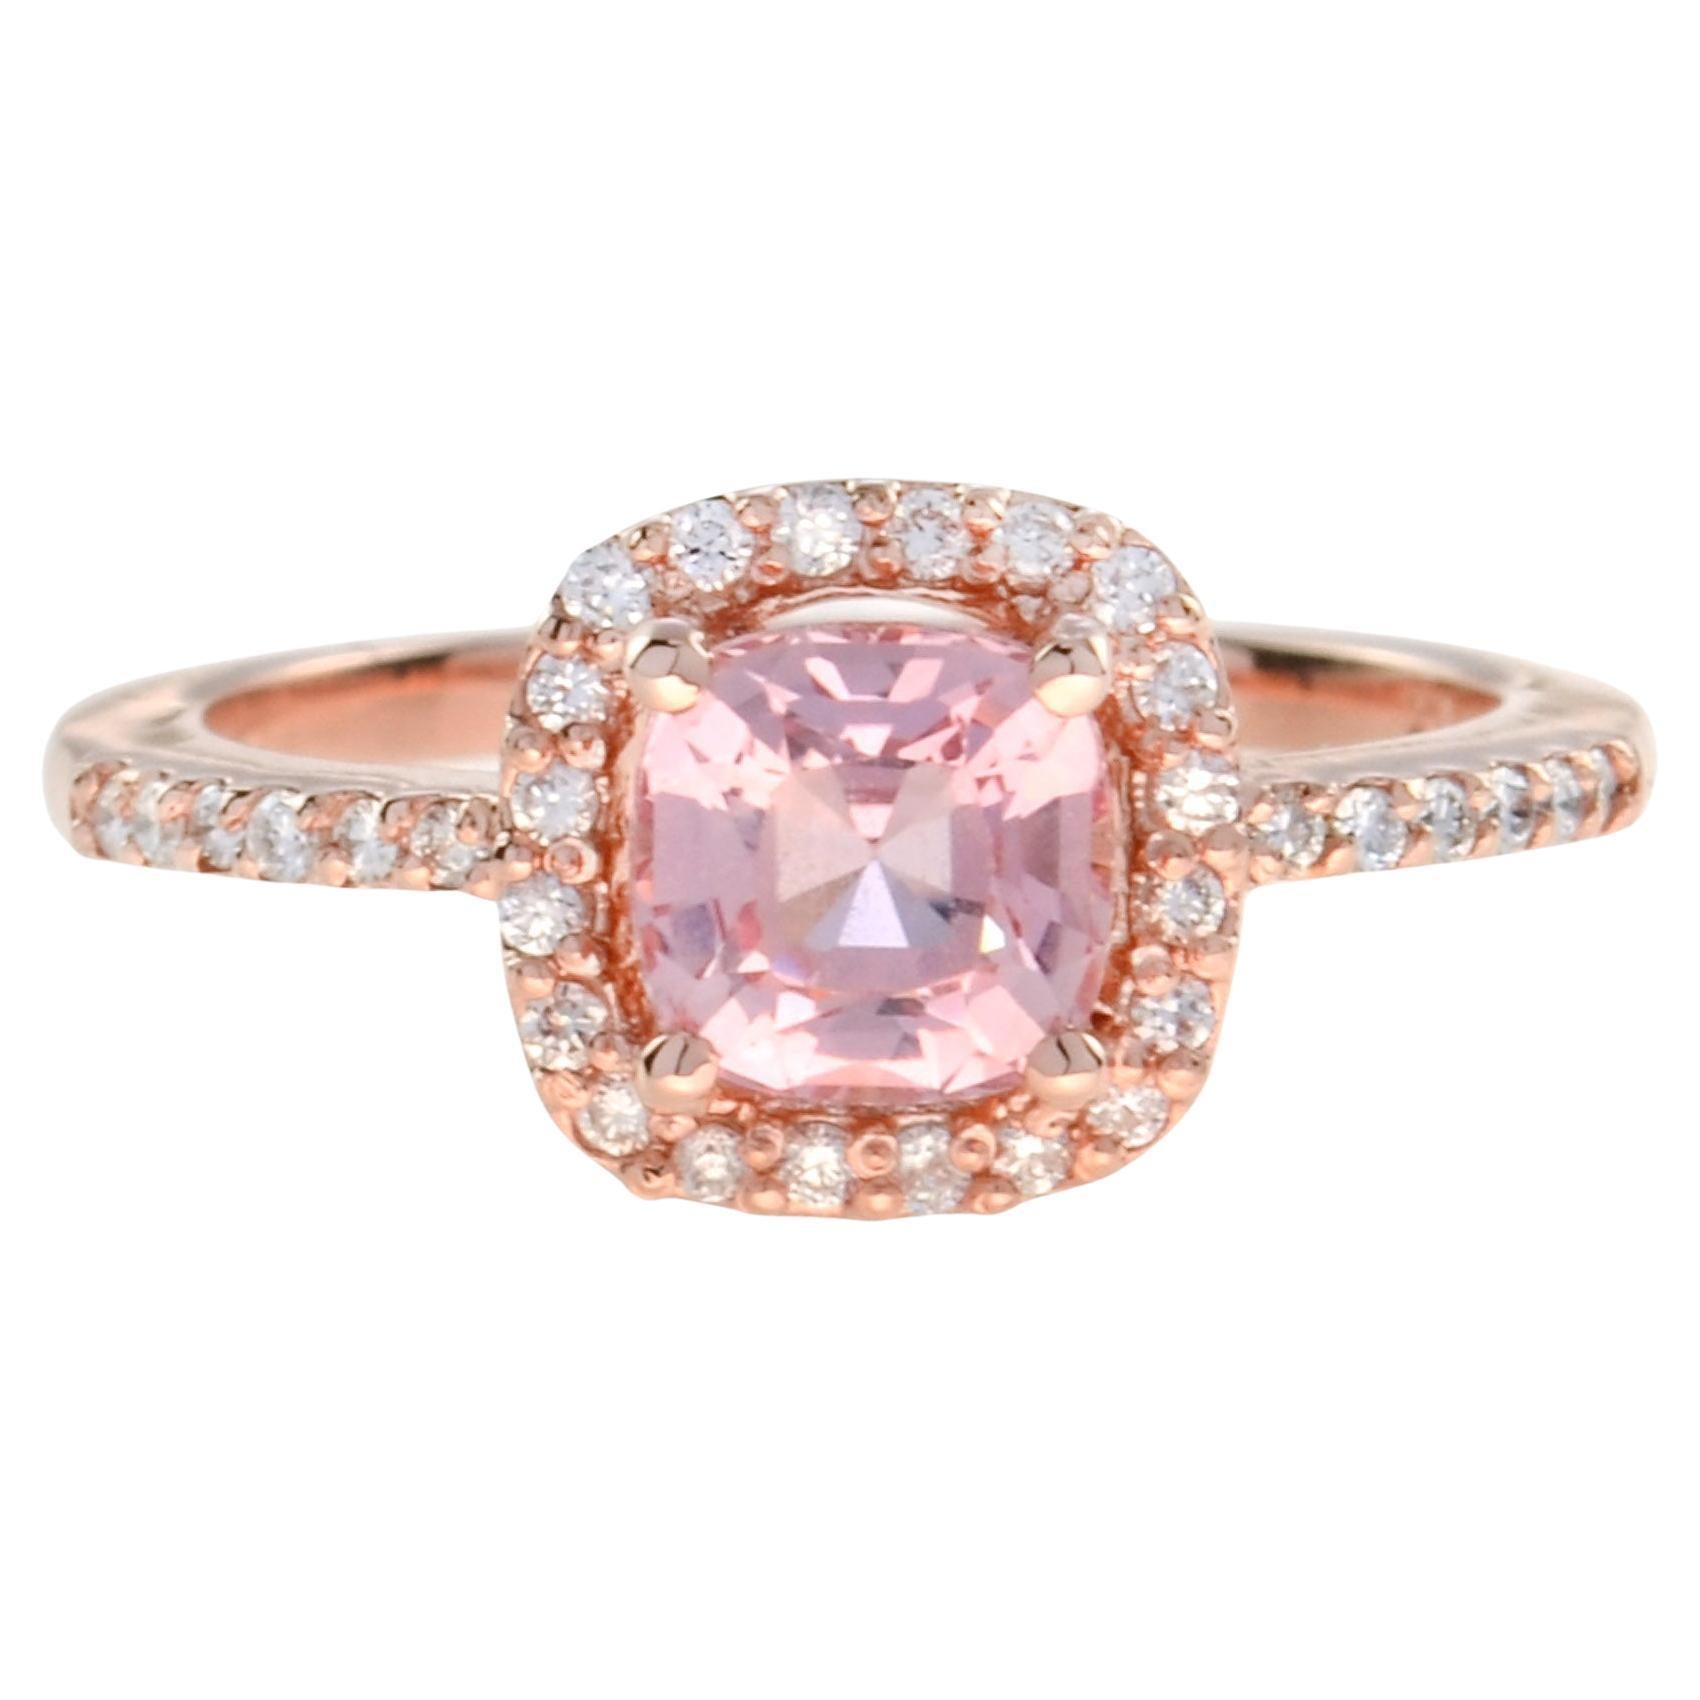 For Sale:  Halona Cushion Morganite and Diamond Halo Ring in 14K Rose Gold